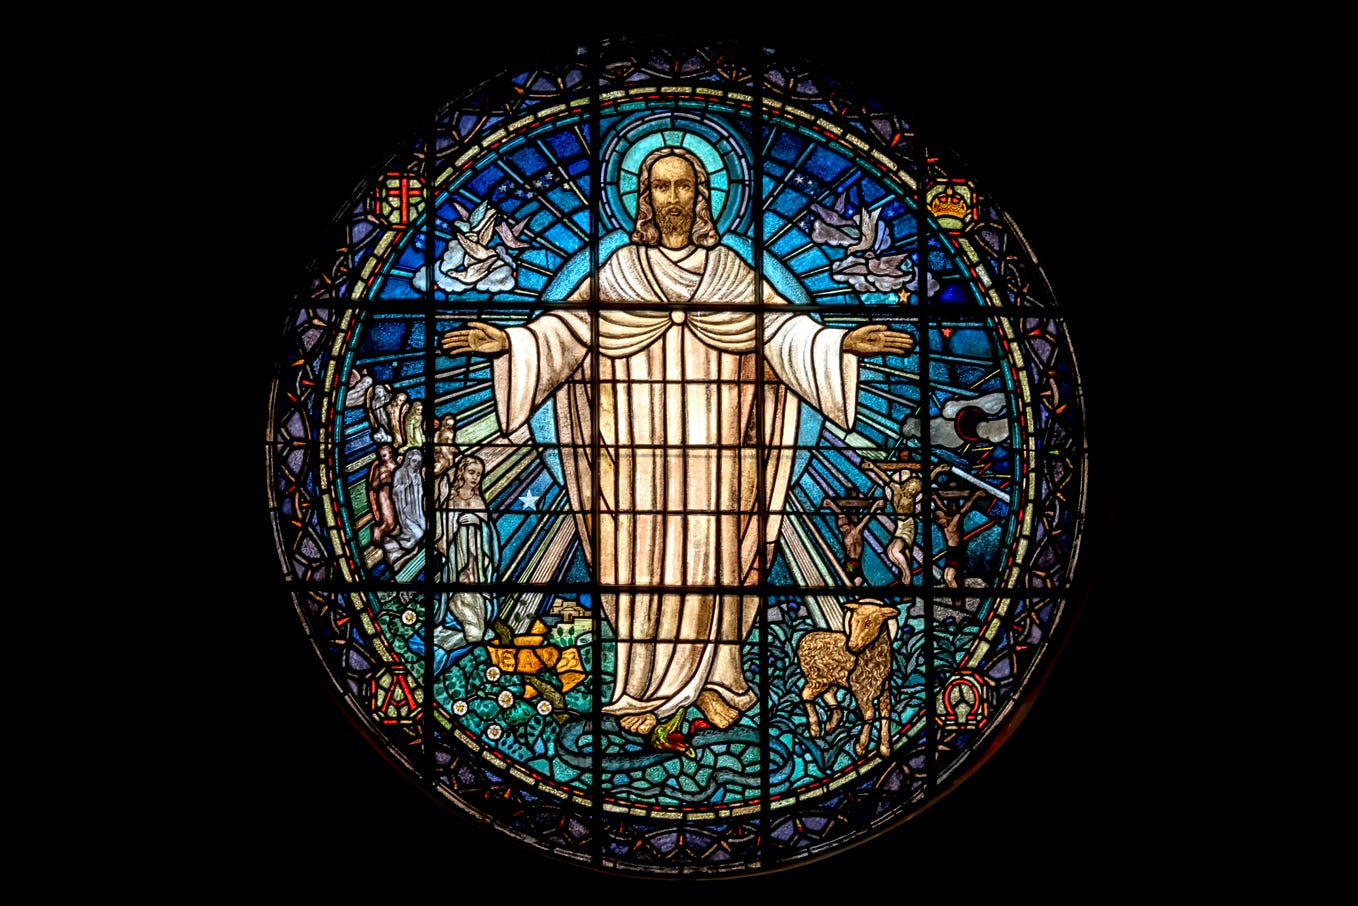 Stained glass picture of Jesus the Nazarene with a lamb at his feet and doves flying from his hands